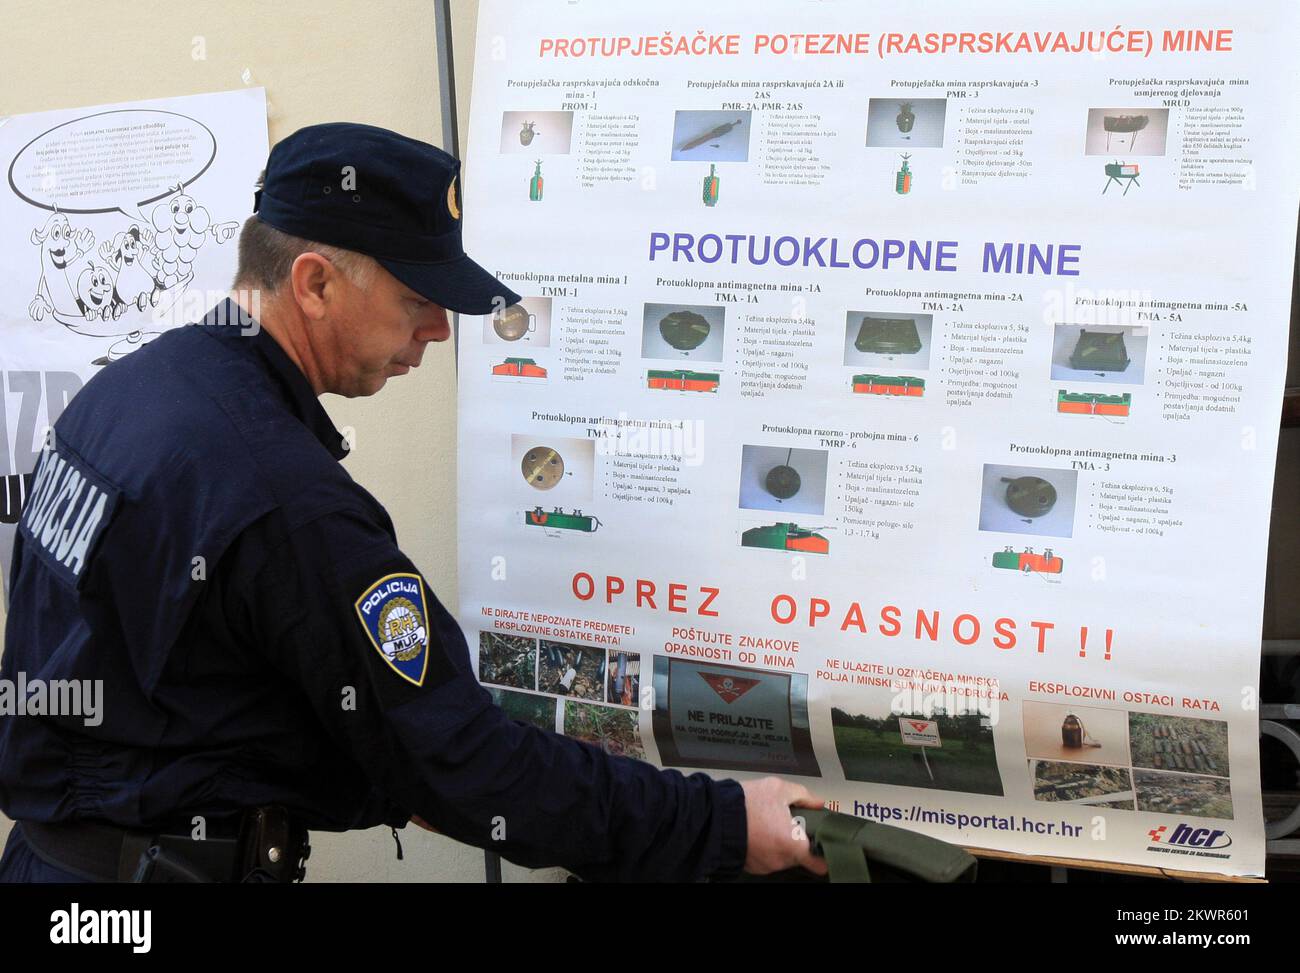 30.01.2014., Croatia, Sibenik - Representatives of the Ministry of Interior and HRC in the campaign Less weapons less tragedy showed the dangerous mines and explosive ordnance which has a large number of field Sibenik hinterland. Besides the members of the HRC and the Ministry of Internal Affairs and attended by the Chief of Police Ivica Kostanic and Drazen Simunovic, chief of the department for education and mine victim assistance. Photo: Dusko Jaramaz/PIXSELL Stock Photo